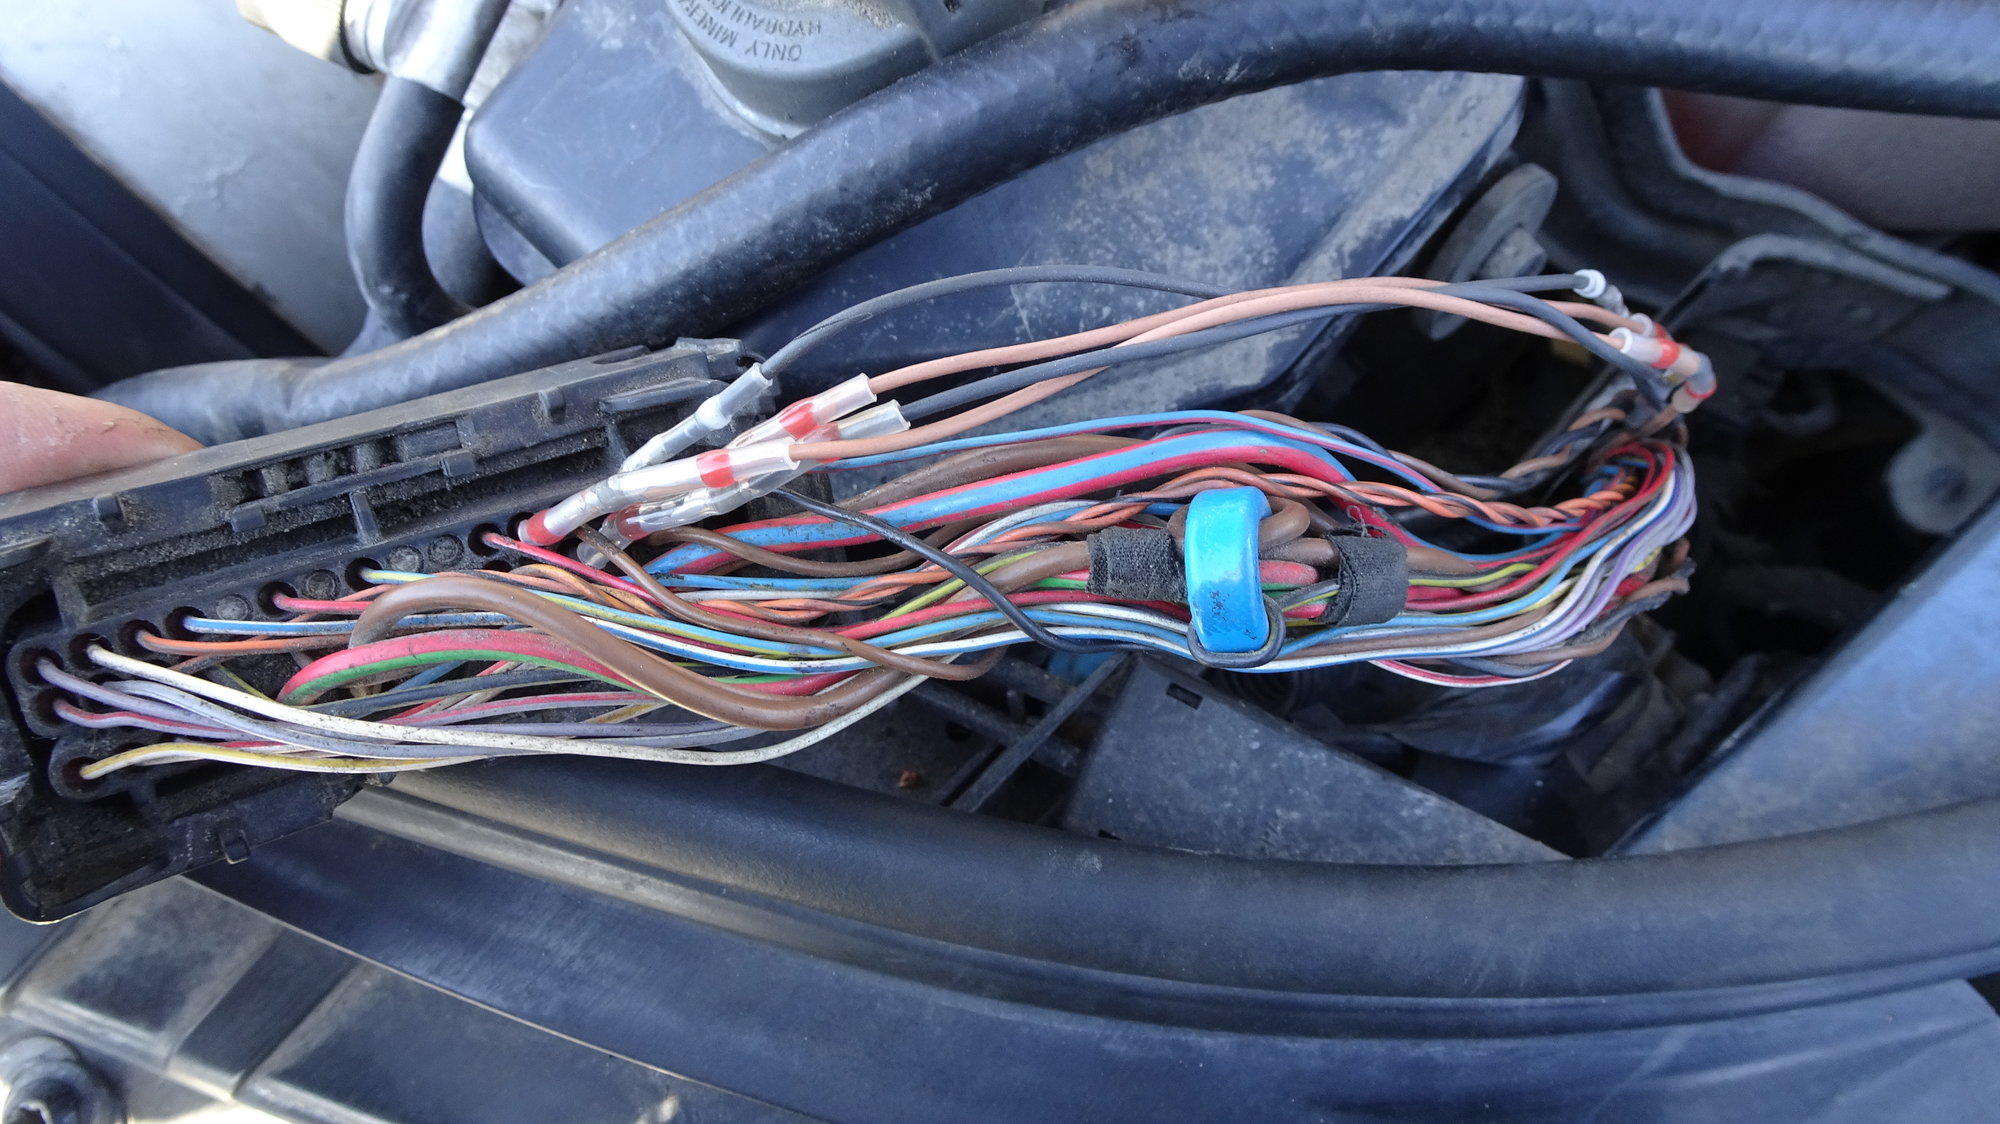 abs connectors and wiring location - AudiWorld Forums  AudiWorld